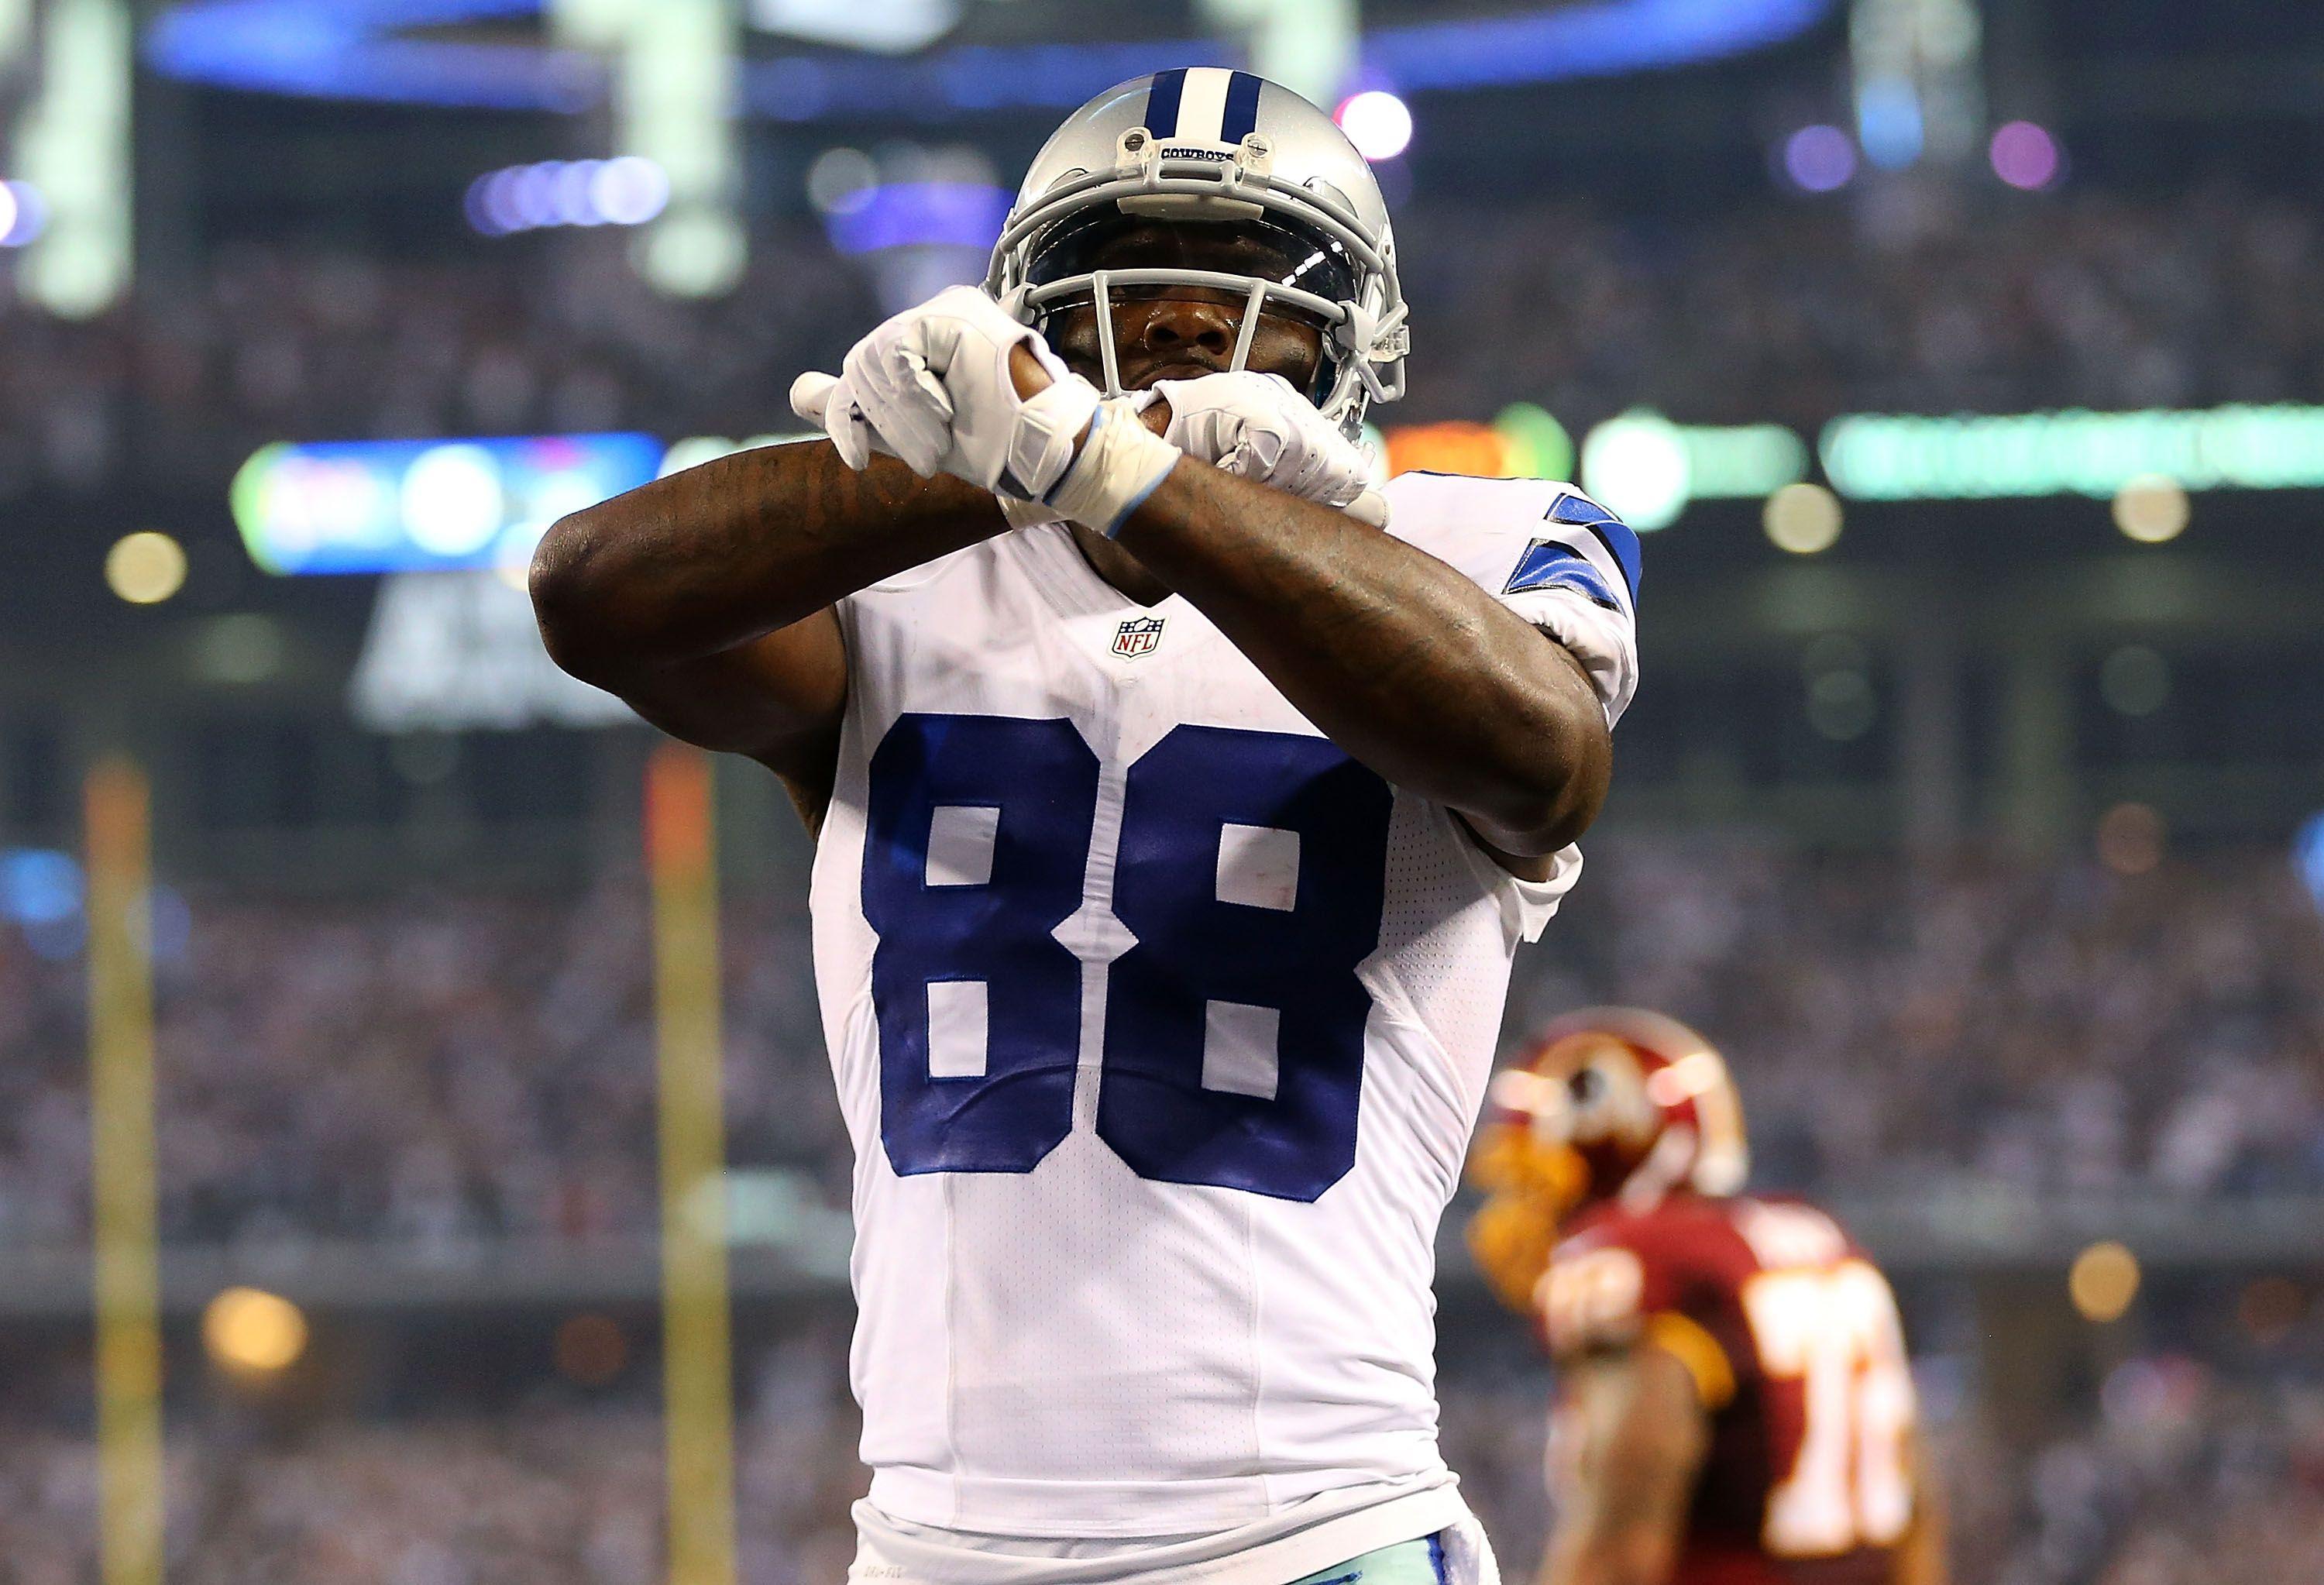 Dez Bryant Wallpaper Image Photo Picture Background